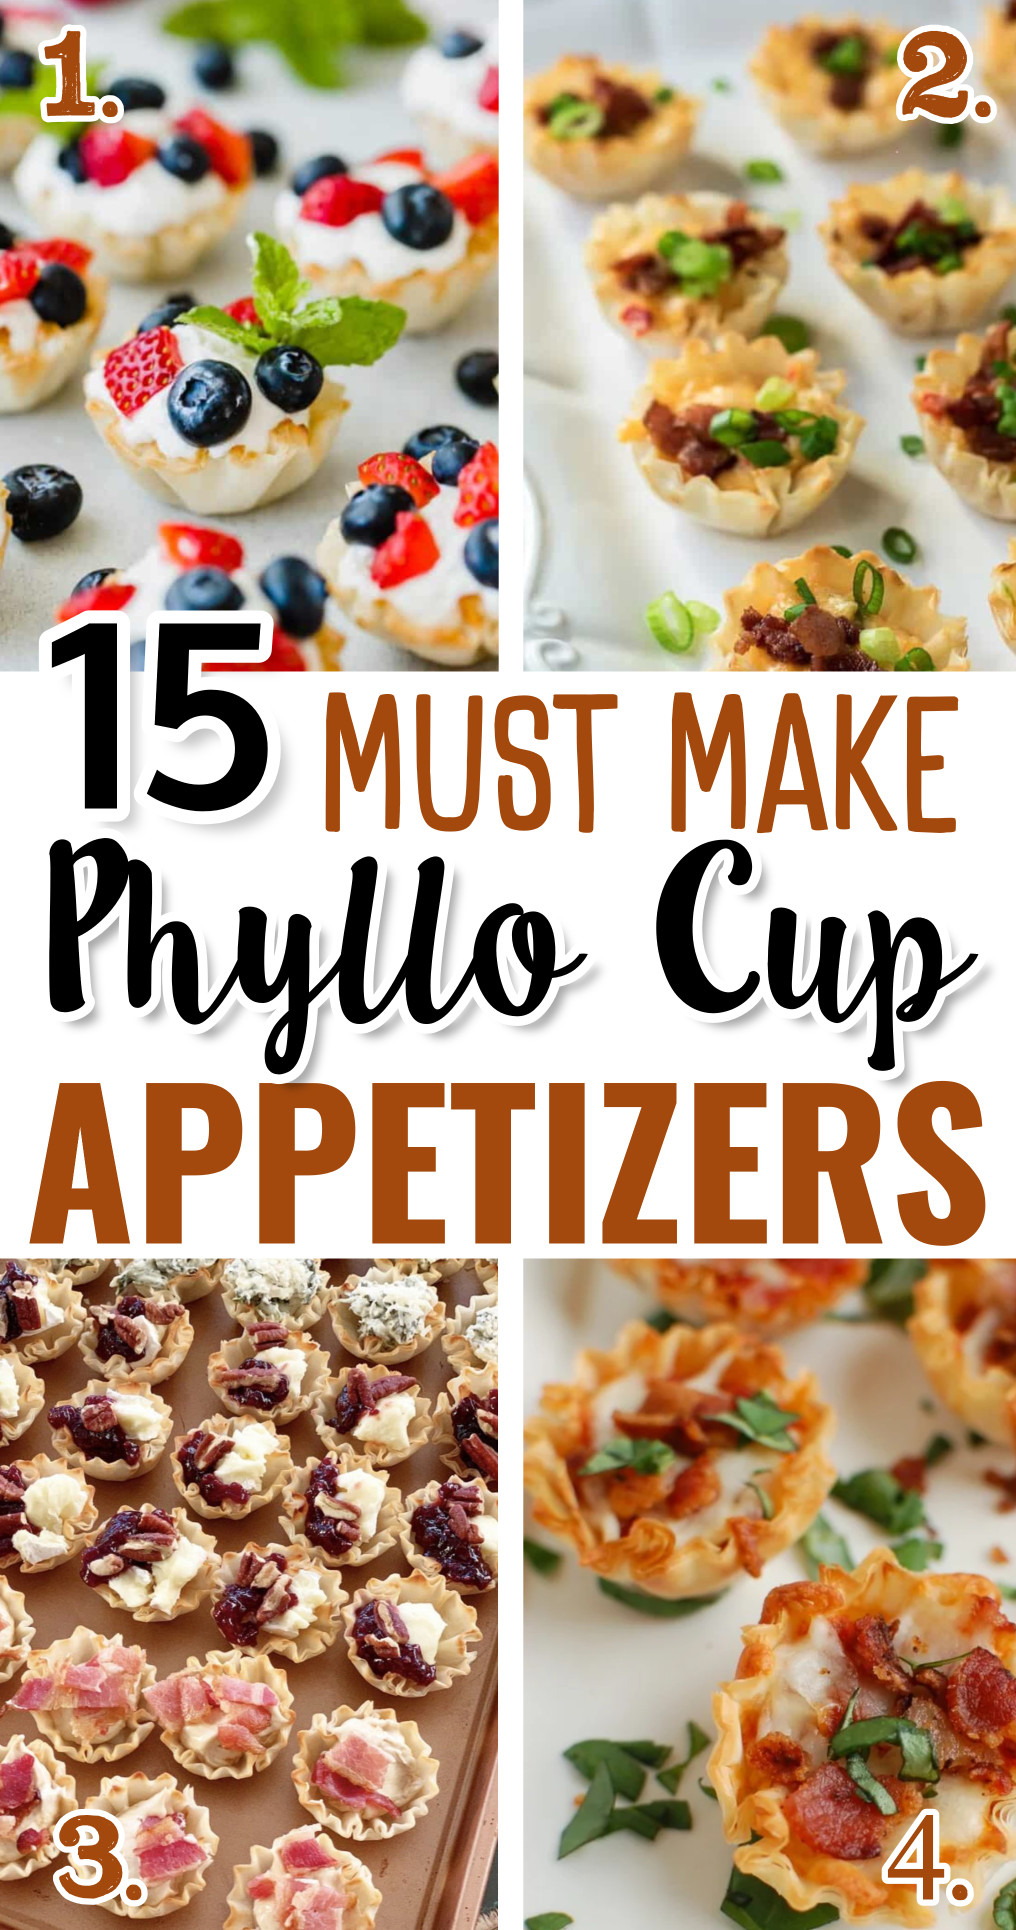 Appetizers - 15 Must Make Phyllo Cup Appetizers